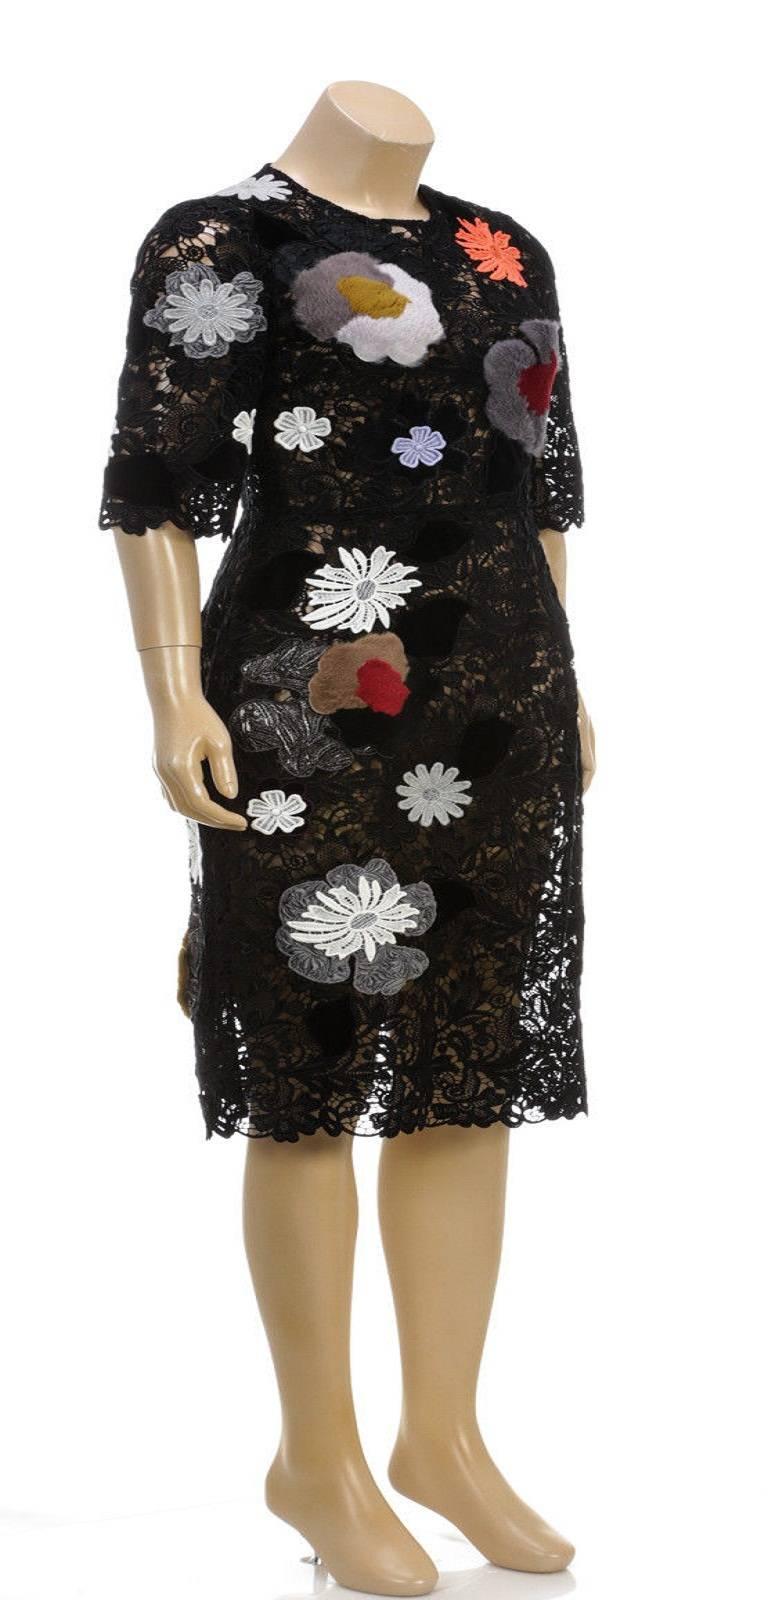 Dolce & Gabbana Black Half Sleeve Macrame Floral Applique Dress AW 14 (Size 40) In Excellent Condition For Sale In Corona Del Mar, CA